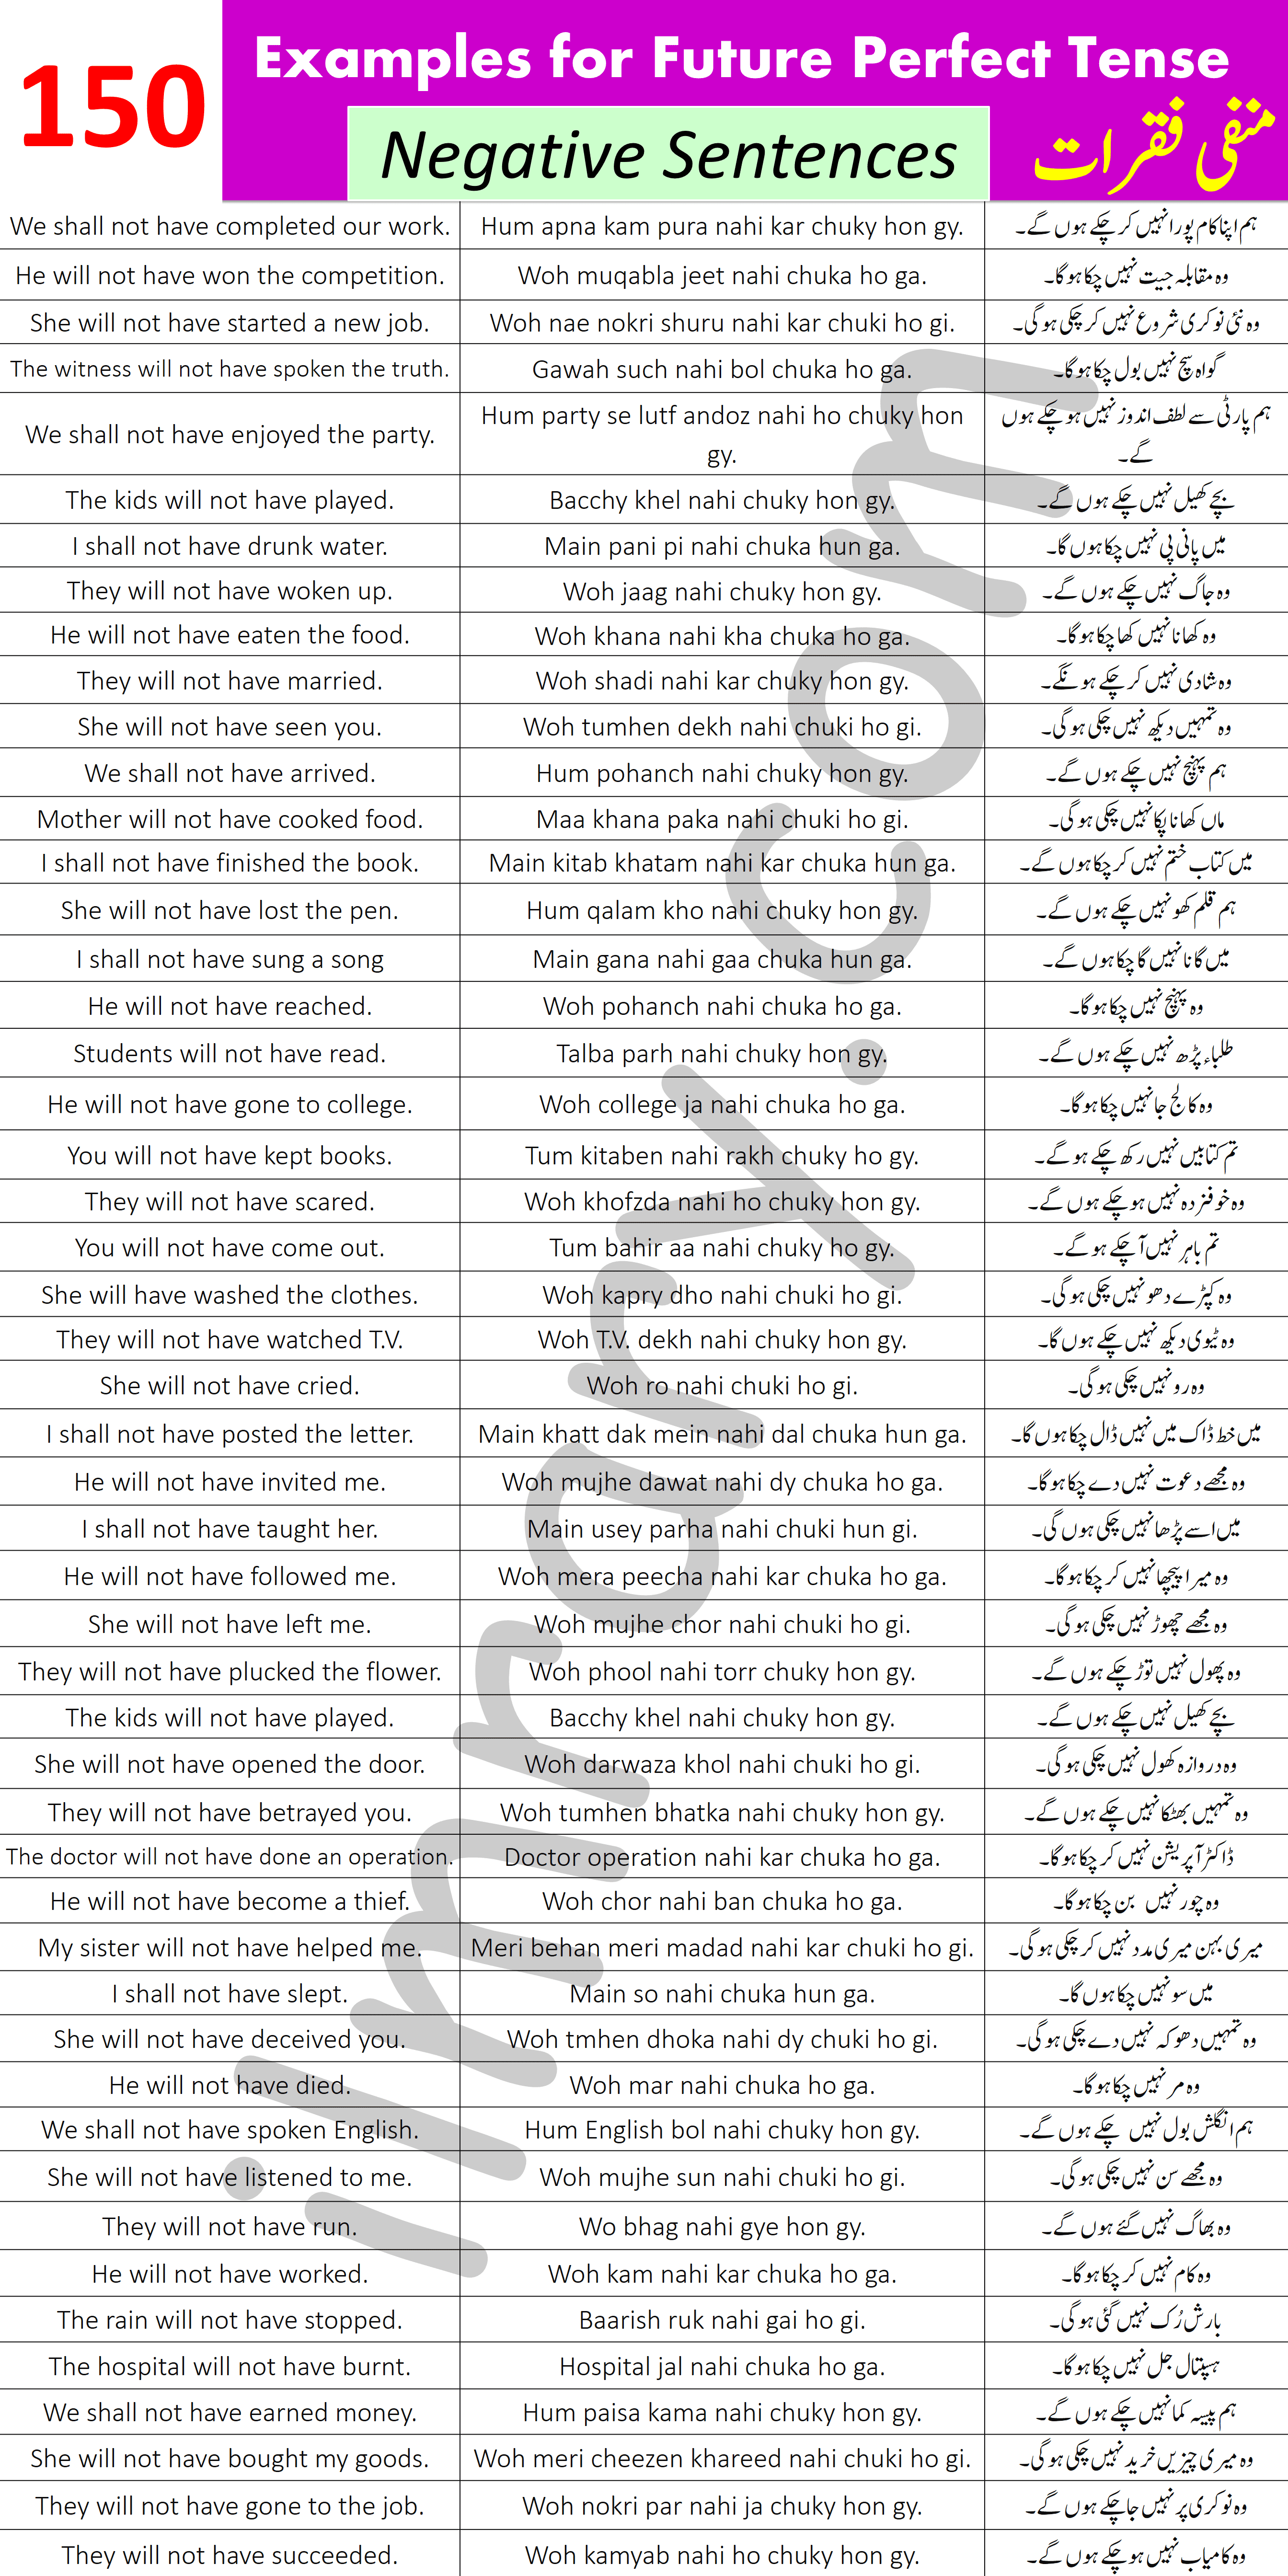 150 Negative Examples for Future Perfect Tense with Urdu Translation